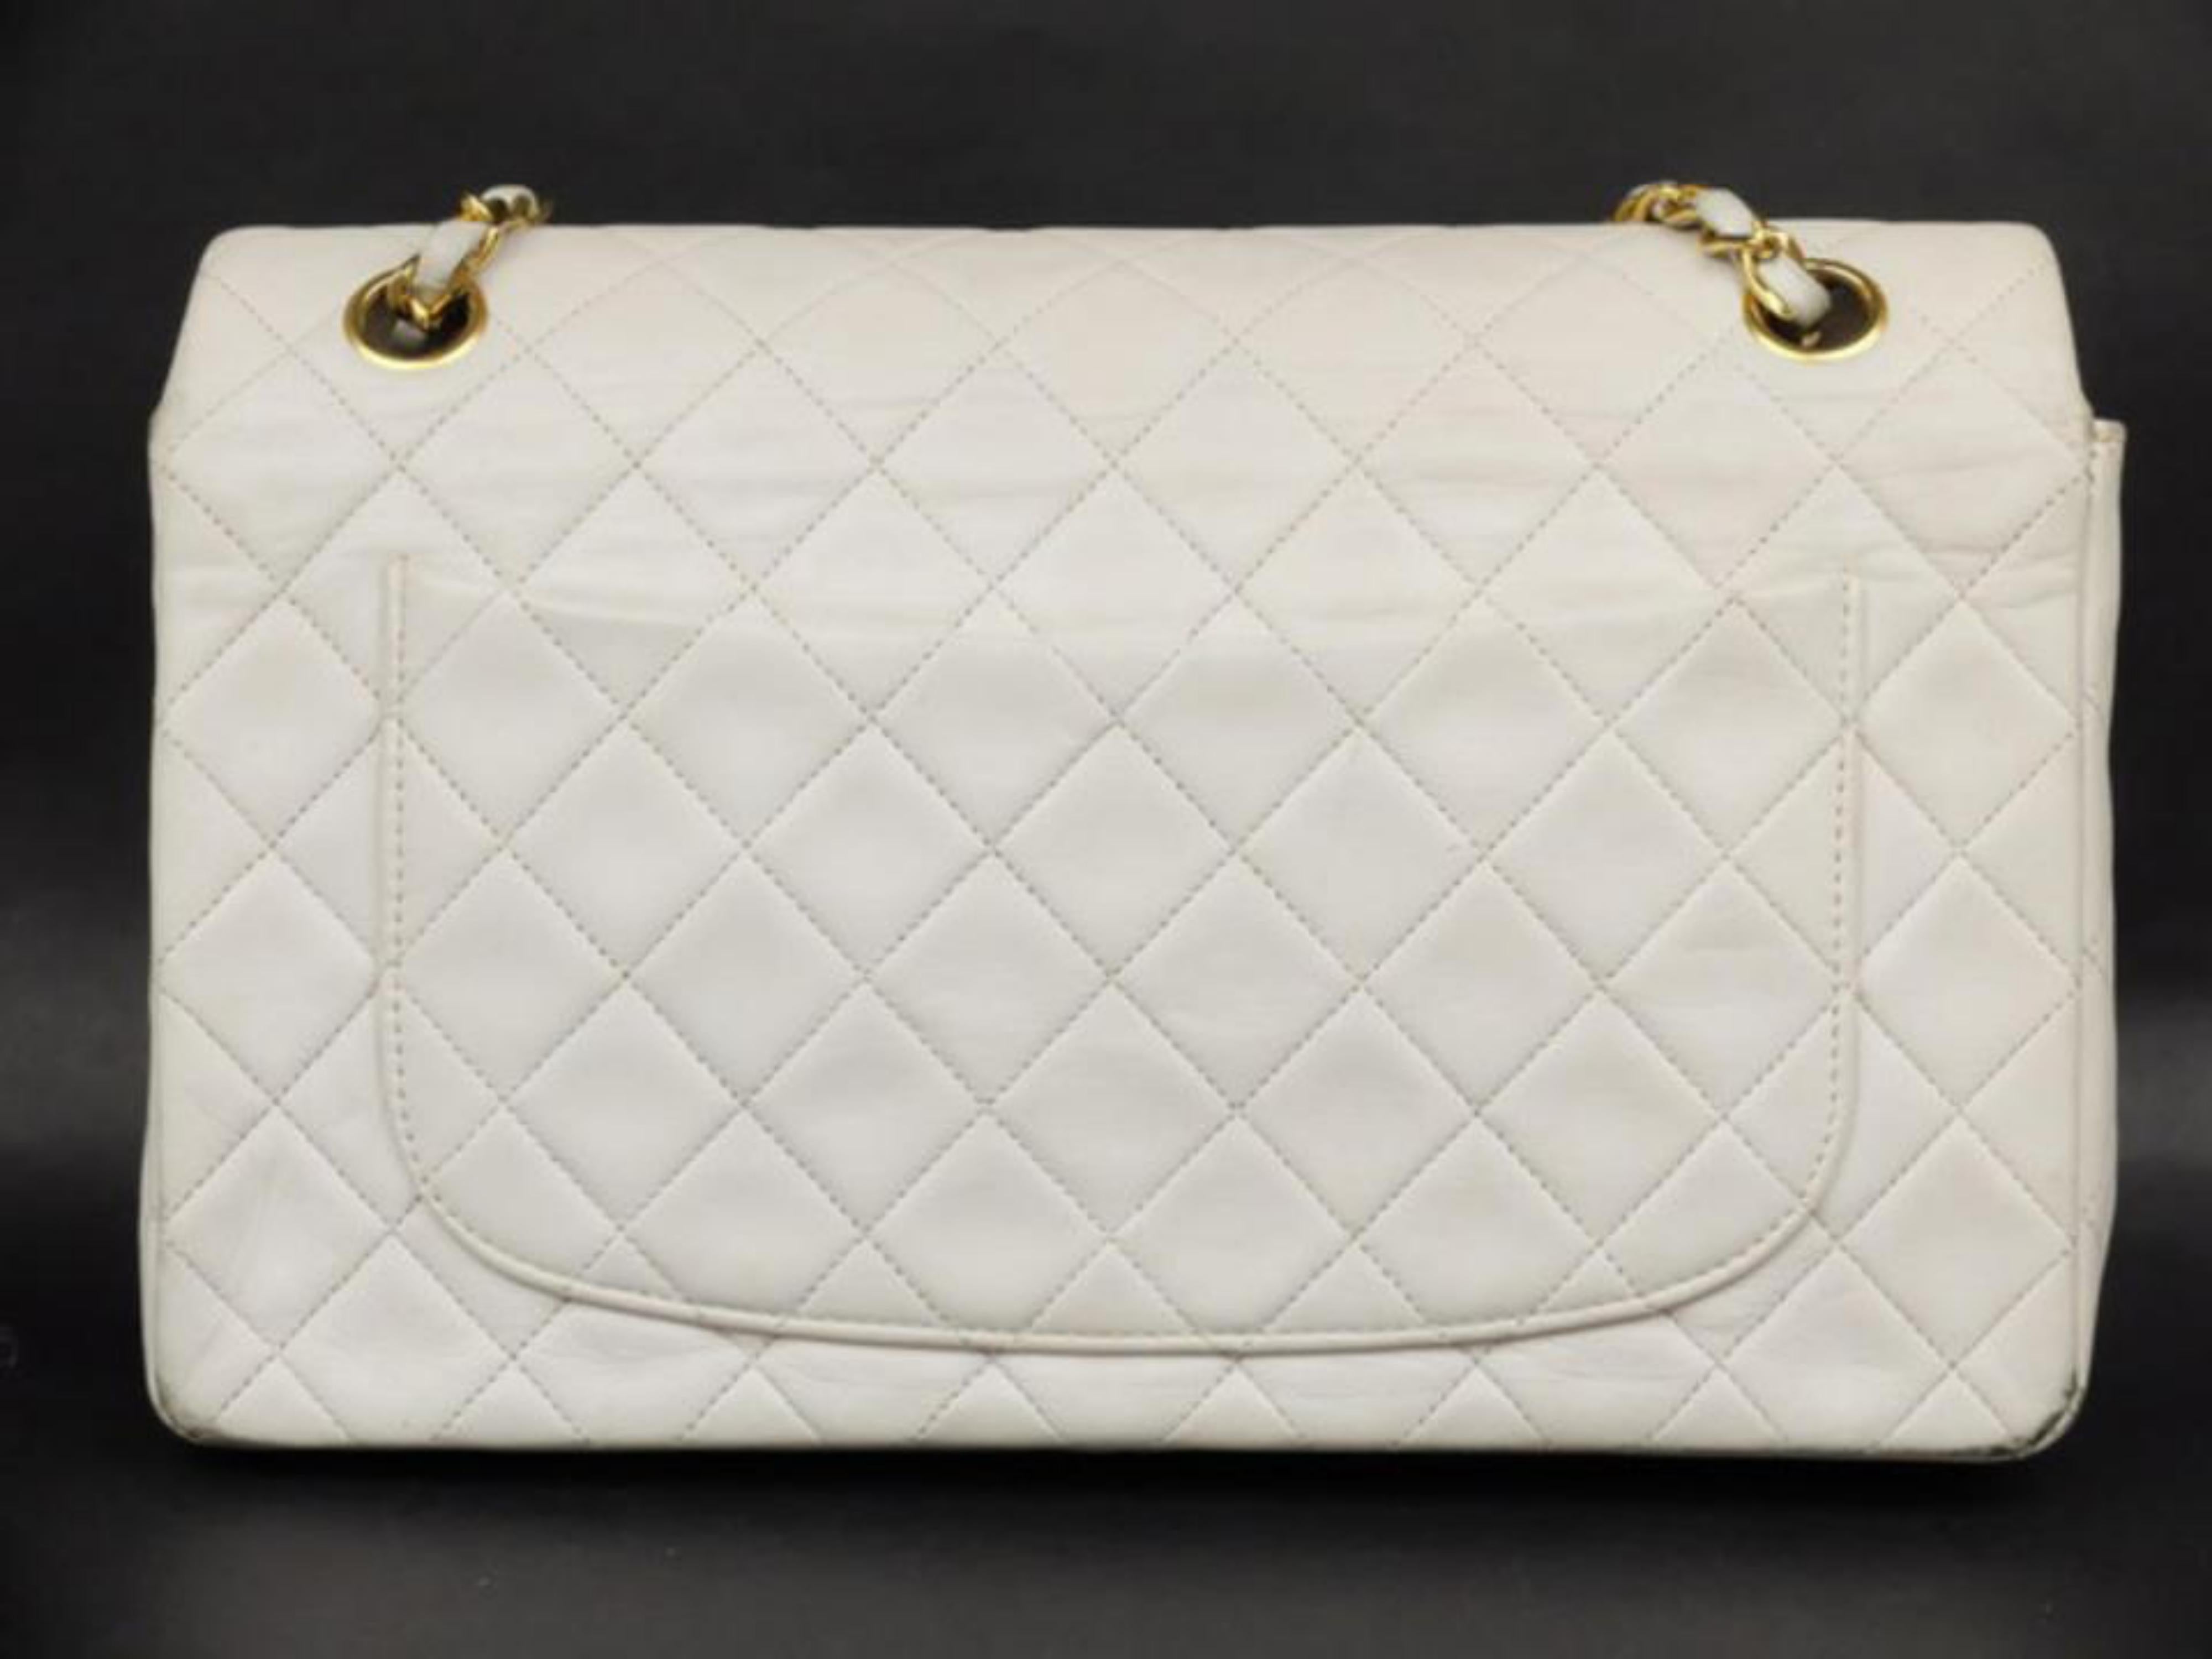 Chanel Classic Flap Quilted Medium 228478 White Leather Shoulder Bag ...